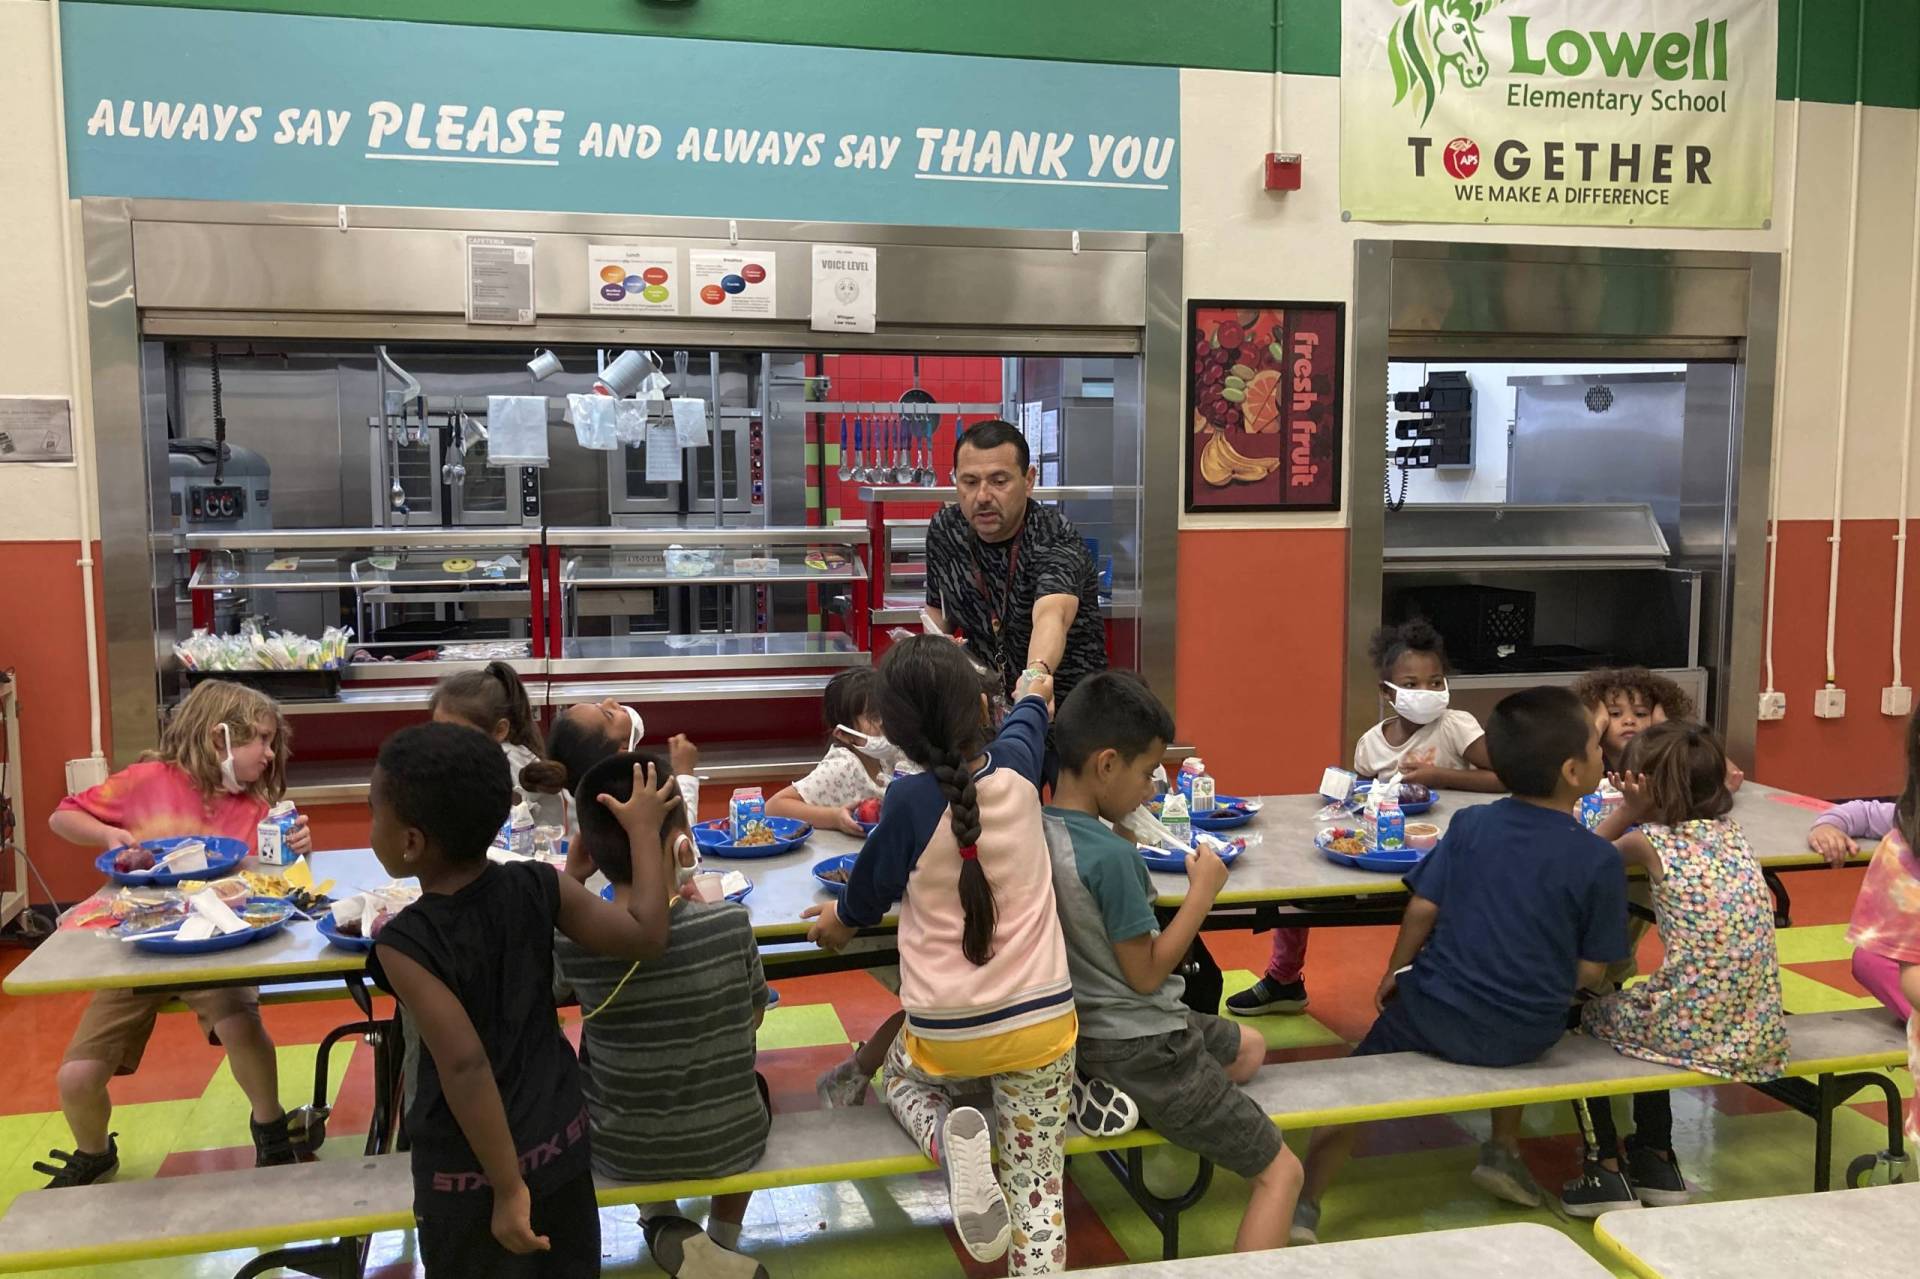 An adult hands out food to children in a canteen.